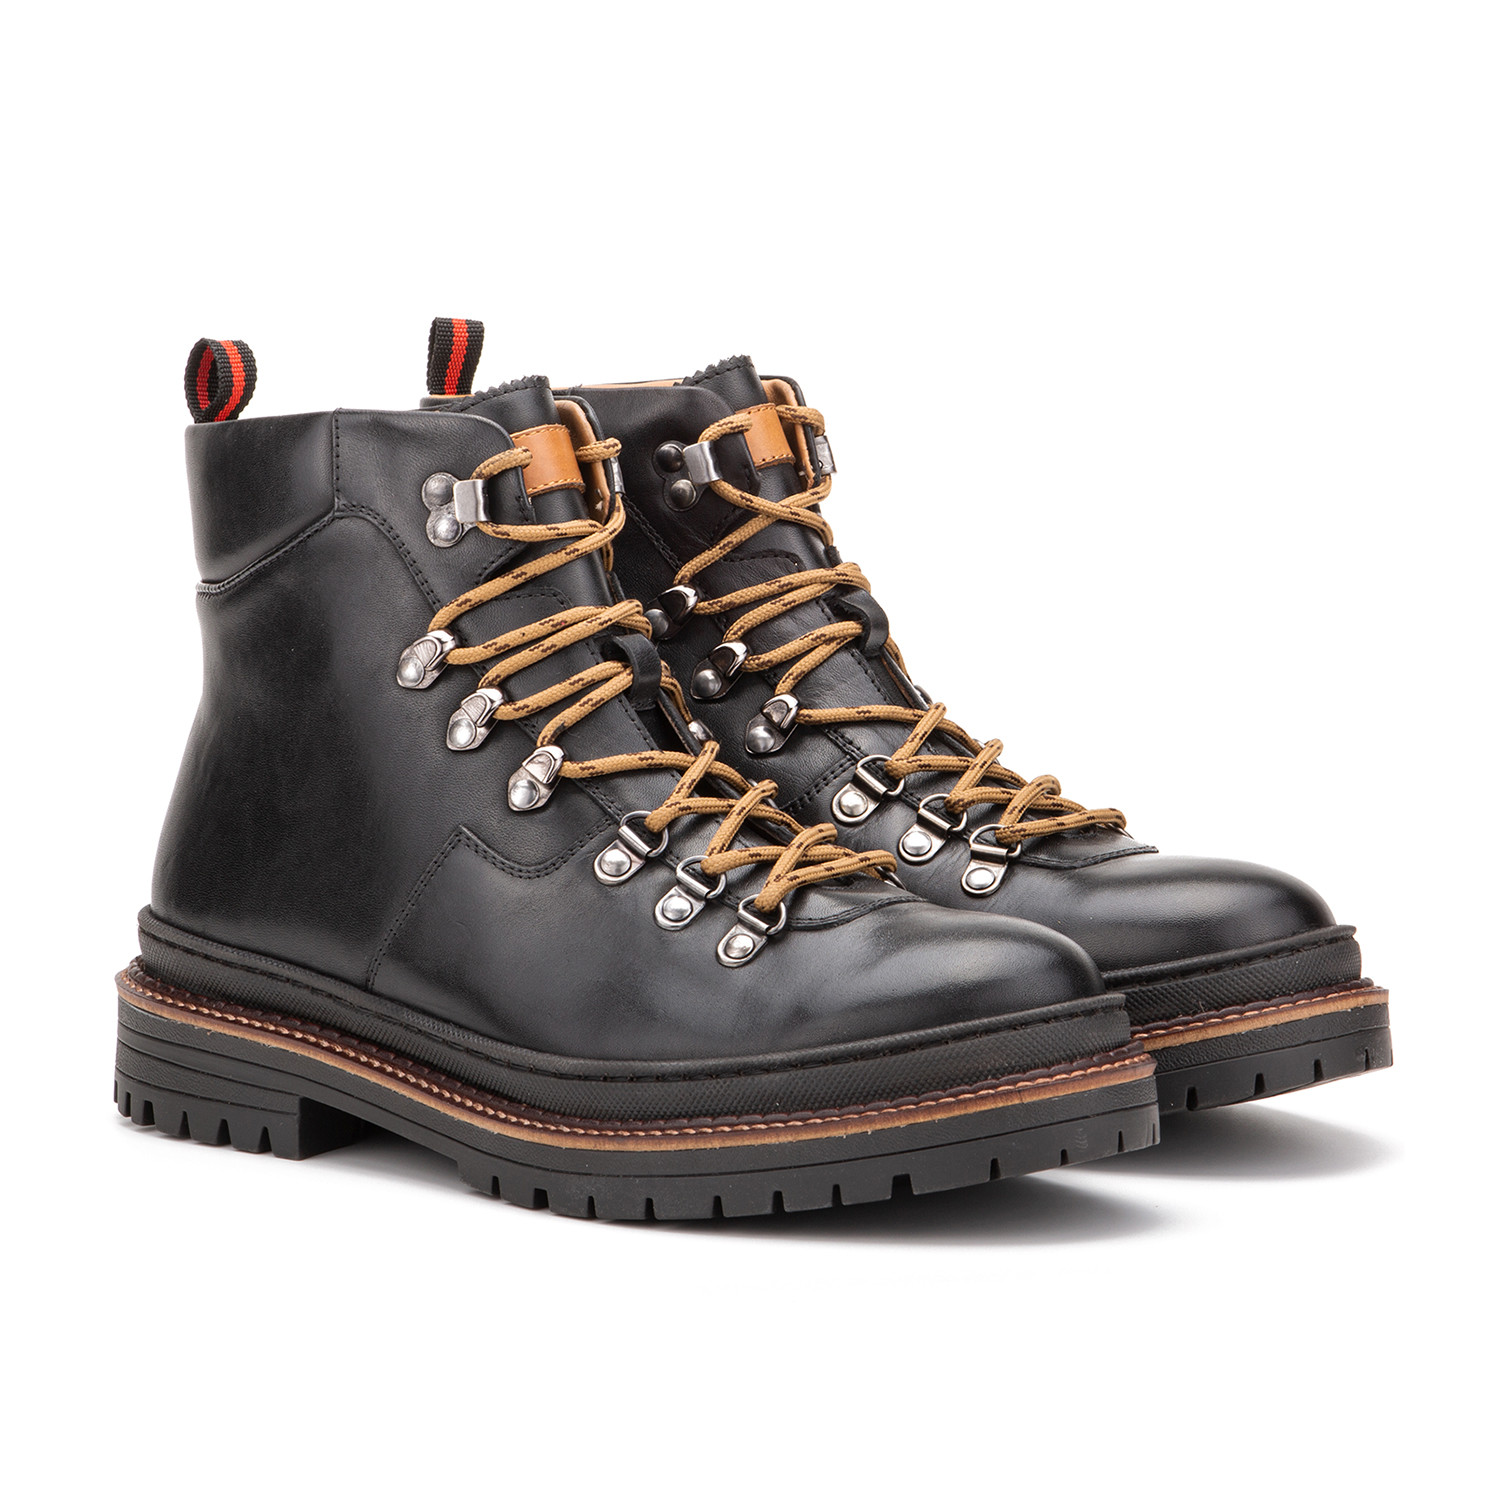 Tiger Boot // Black (US: 8) - S3 Holding - Touch of Modern